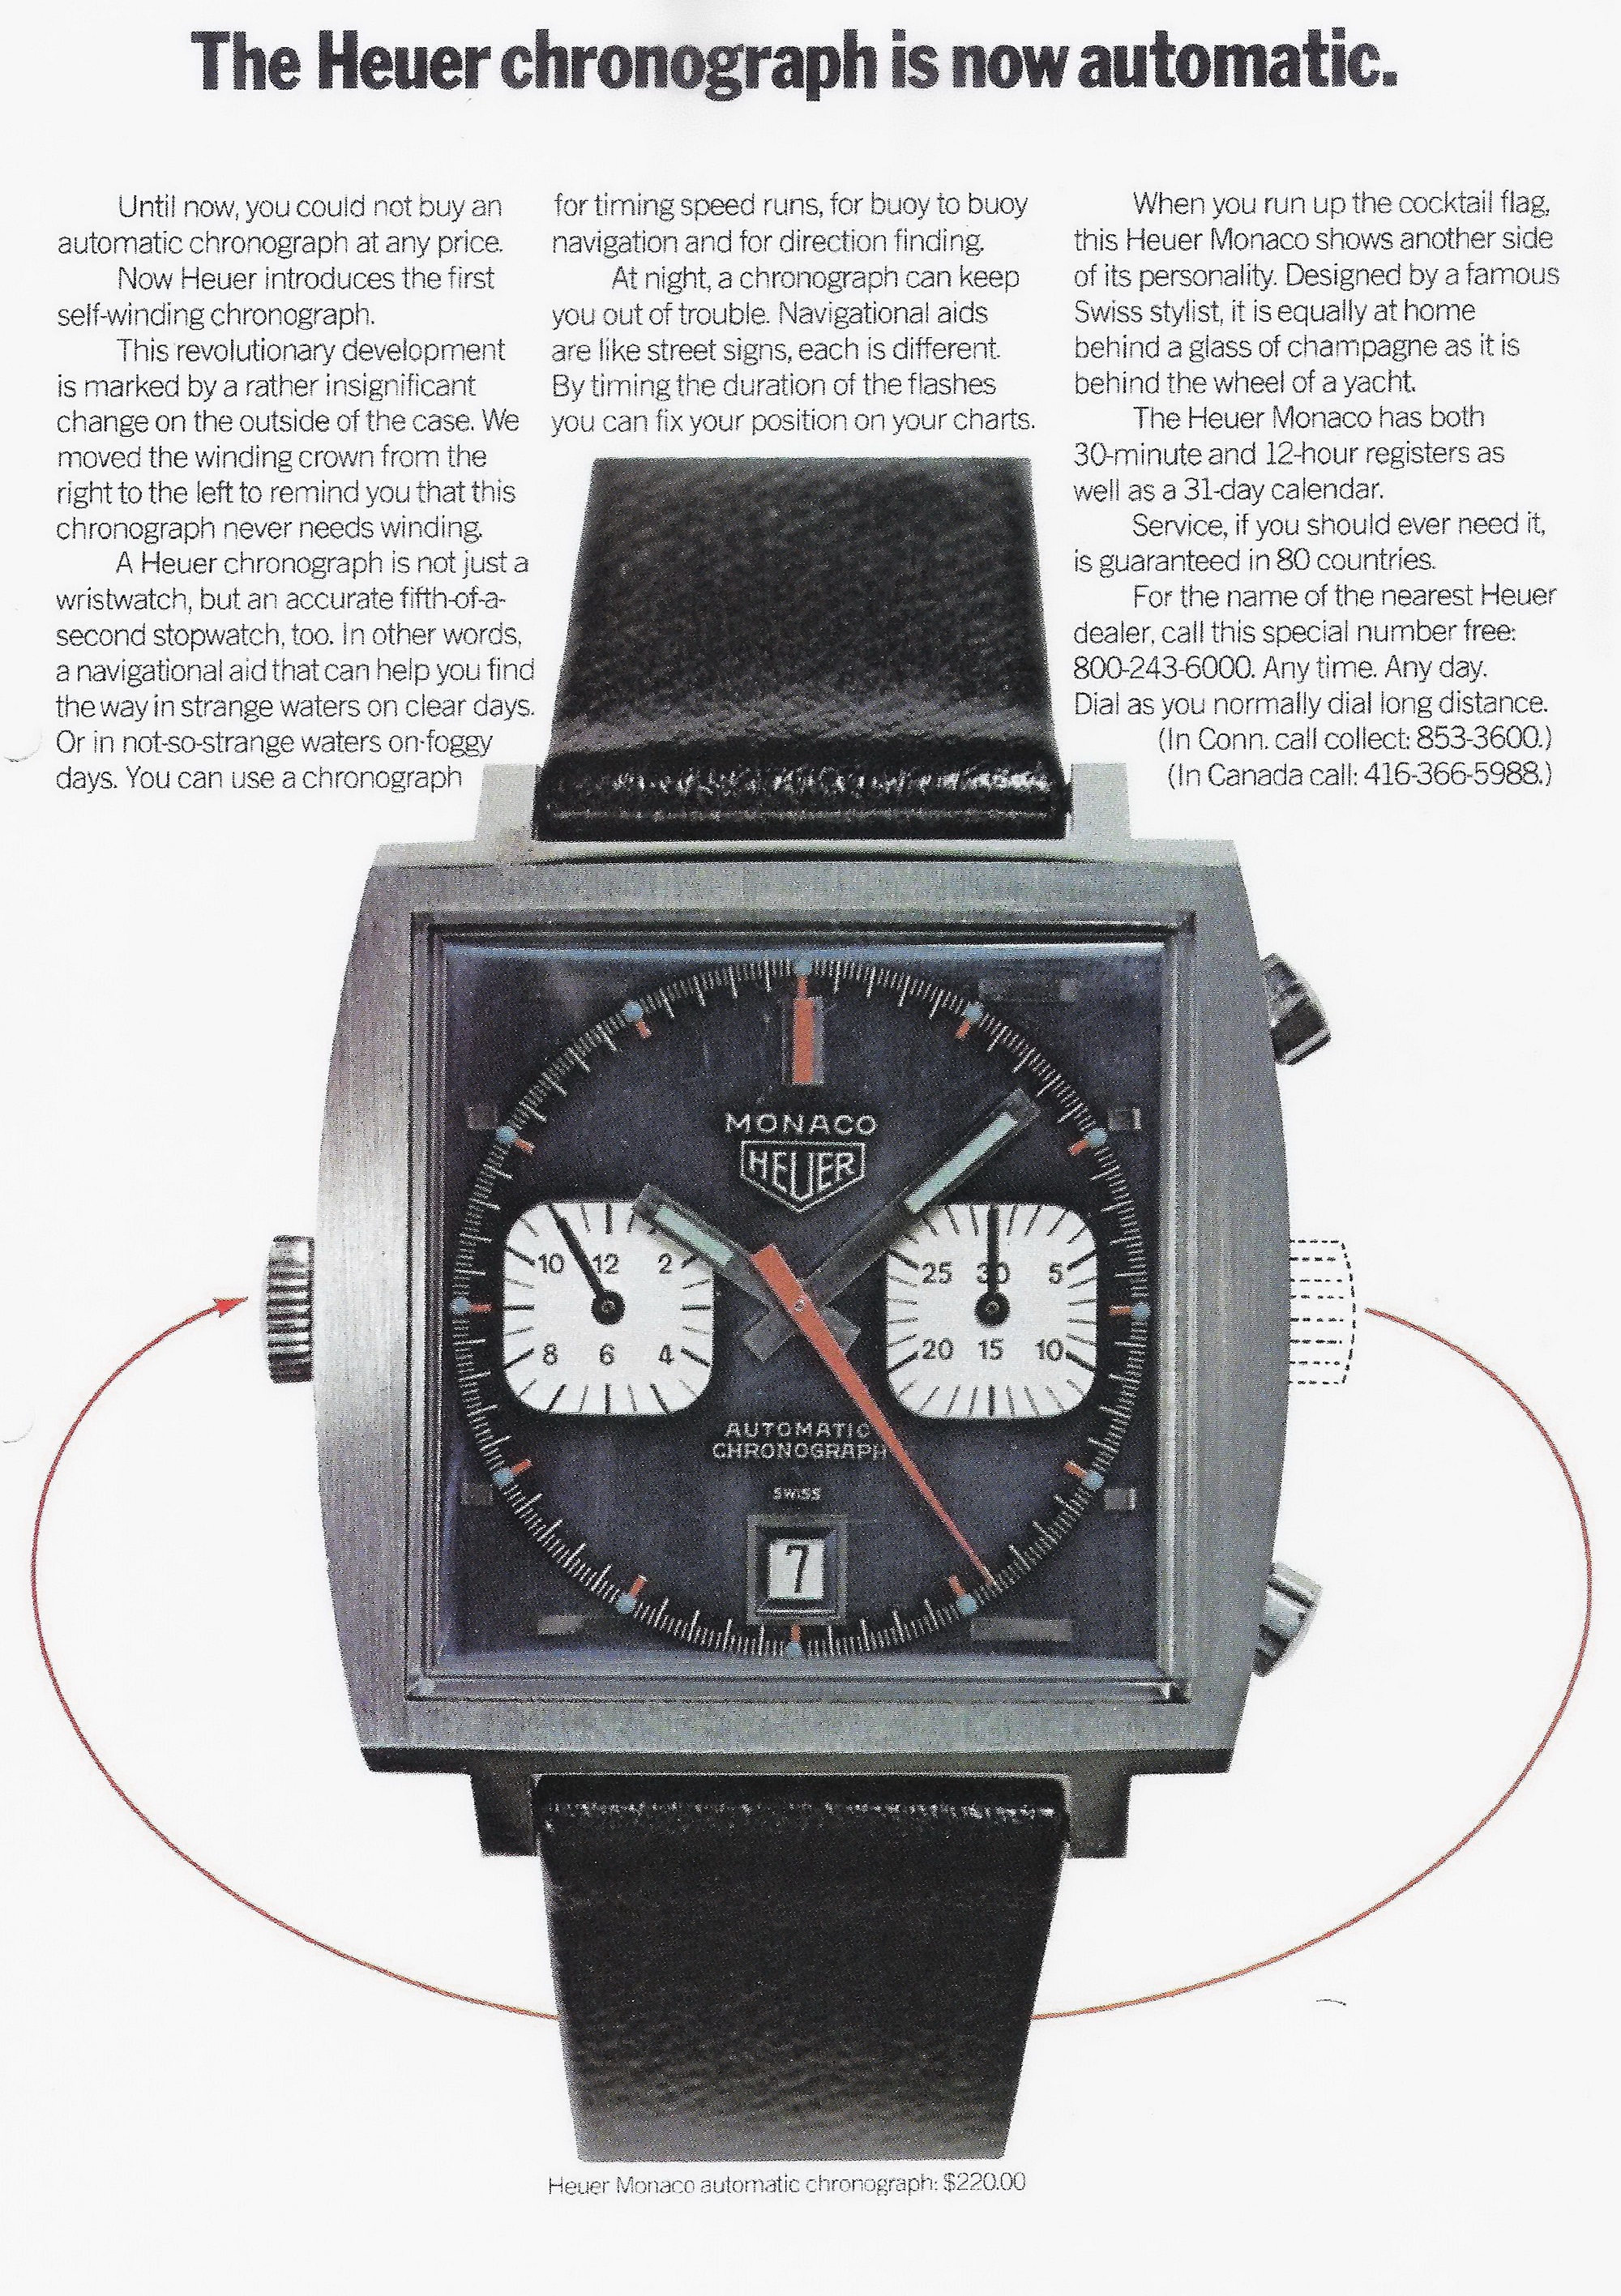 The Heuer Monaco's first corporate advertisement. “We wanted to create an outstanding and innovative product, something avant-garde,” said TAG Heuer Honorary Chairman Jack Heuer. “When I saw the square case, I immediately knew it was something special. Until then, square cases were only used for dress watches because it was not possible to make them water- resistant. We went forward with this unconventional design and negotiated the exclusive use of this revolutionary case for the Monaco wrist chronograph.”